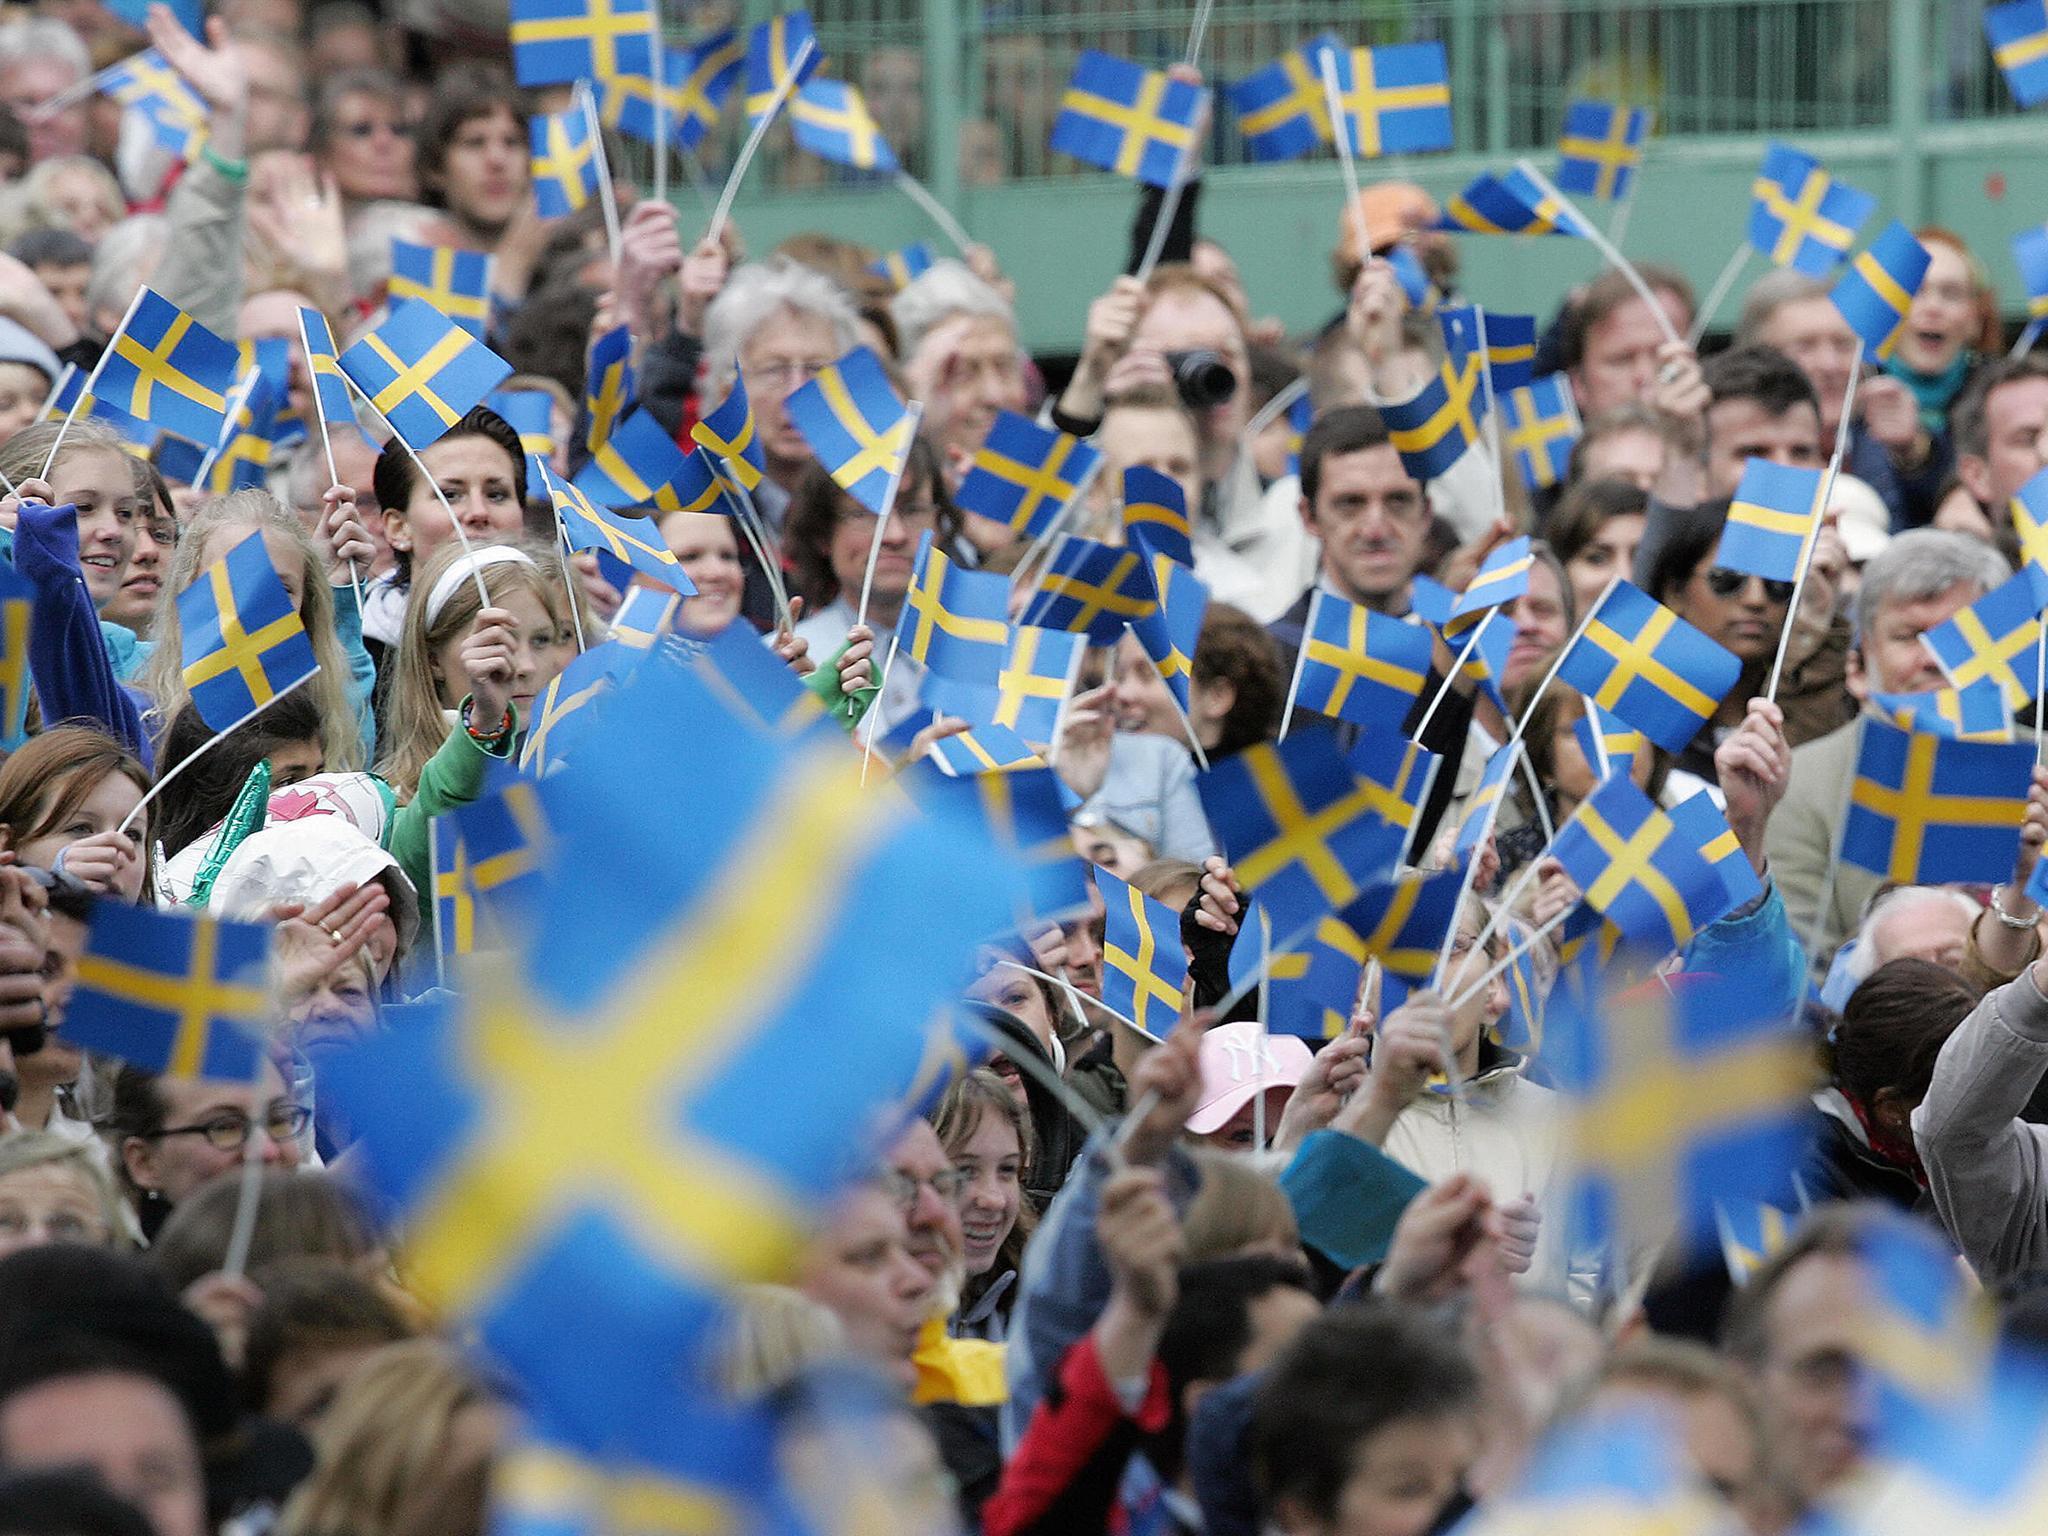 Swedes could soon have a cheeky reason to celebrate